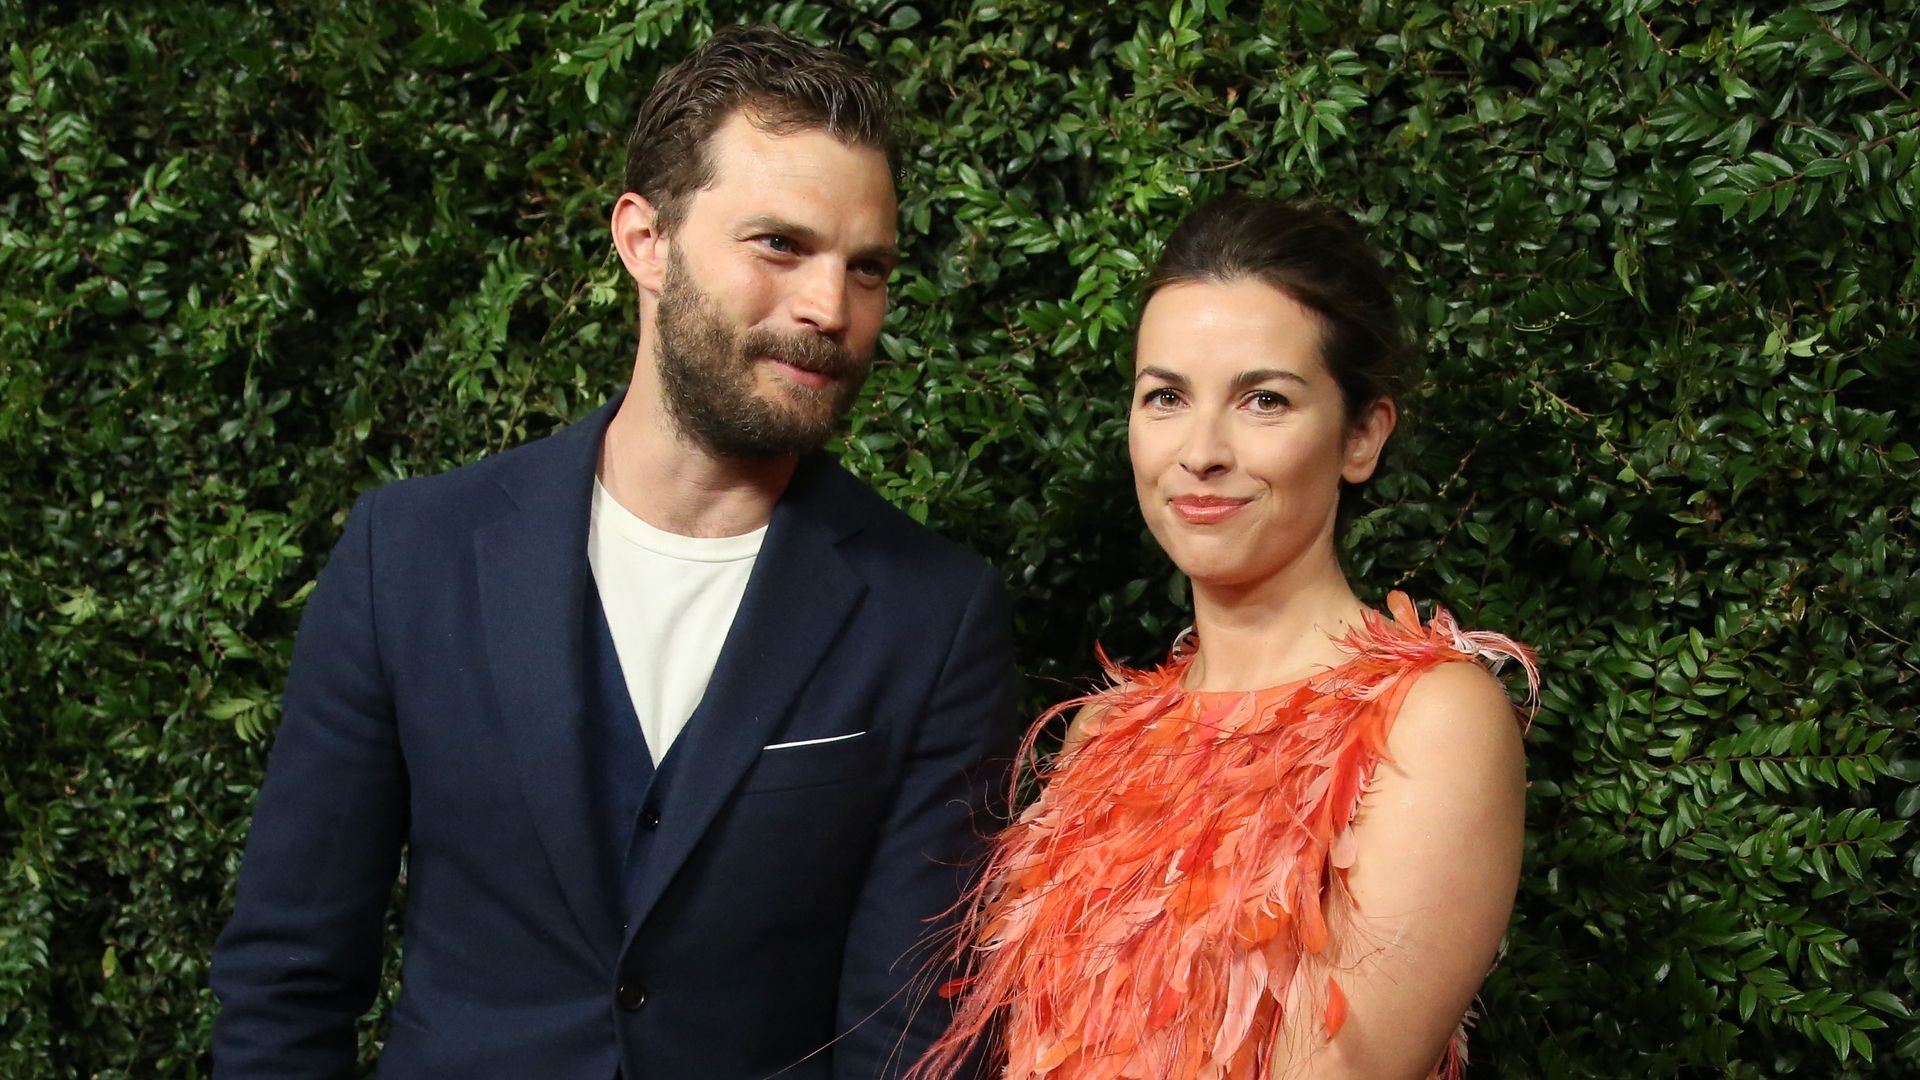 Jamie Dornan and Amelia Warner at Chanel and Charles Finch Pre-Oscar dinner, Arrivals, Los Angeles, USA - 03 Mar 2018